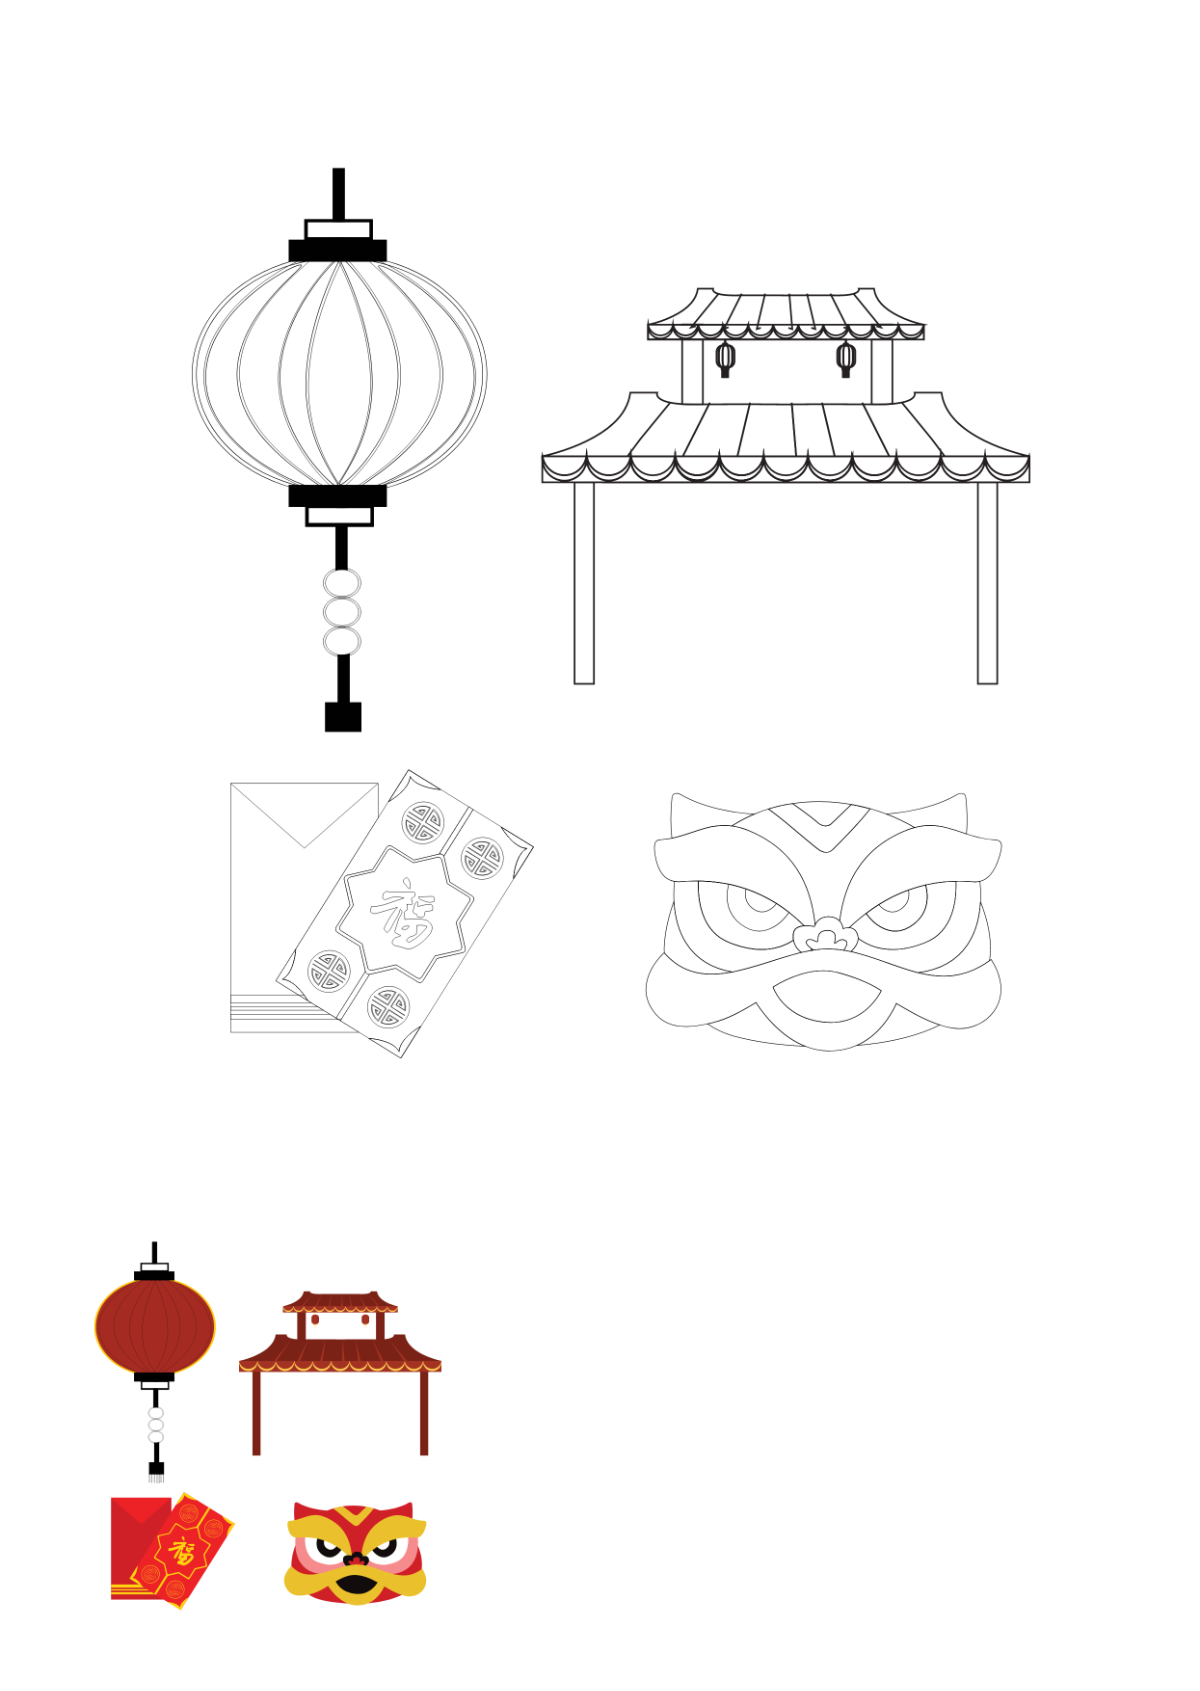 Chinese New Year Decorations Coloring Pages Template